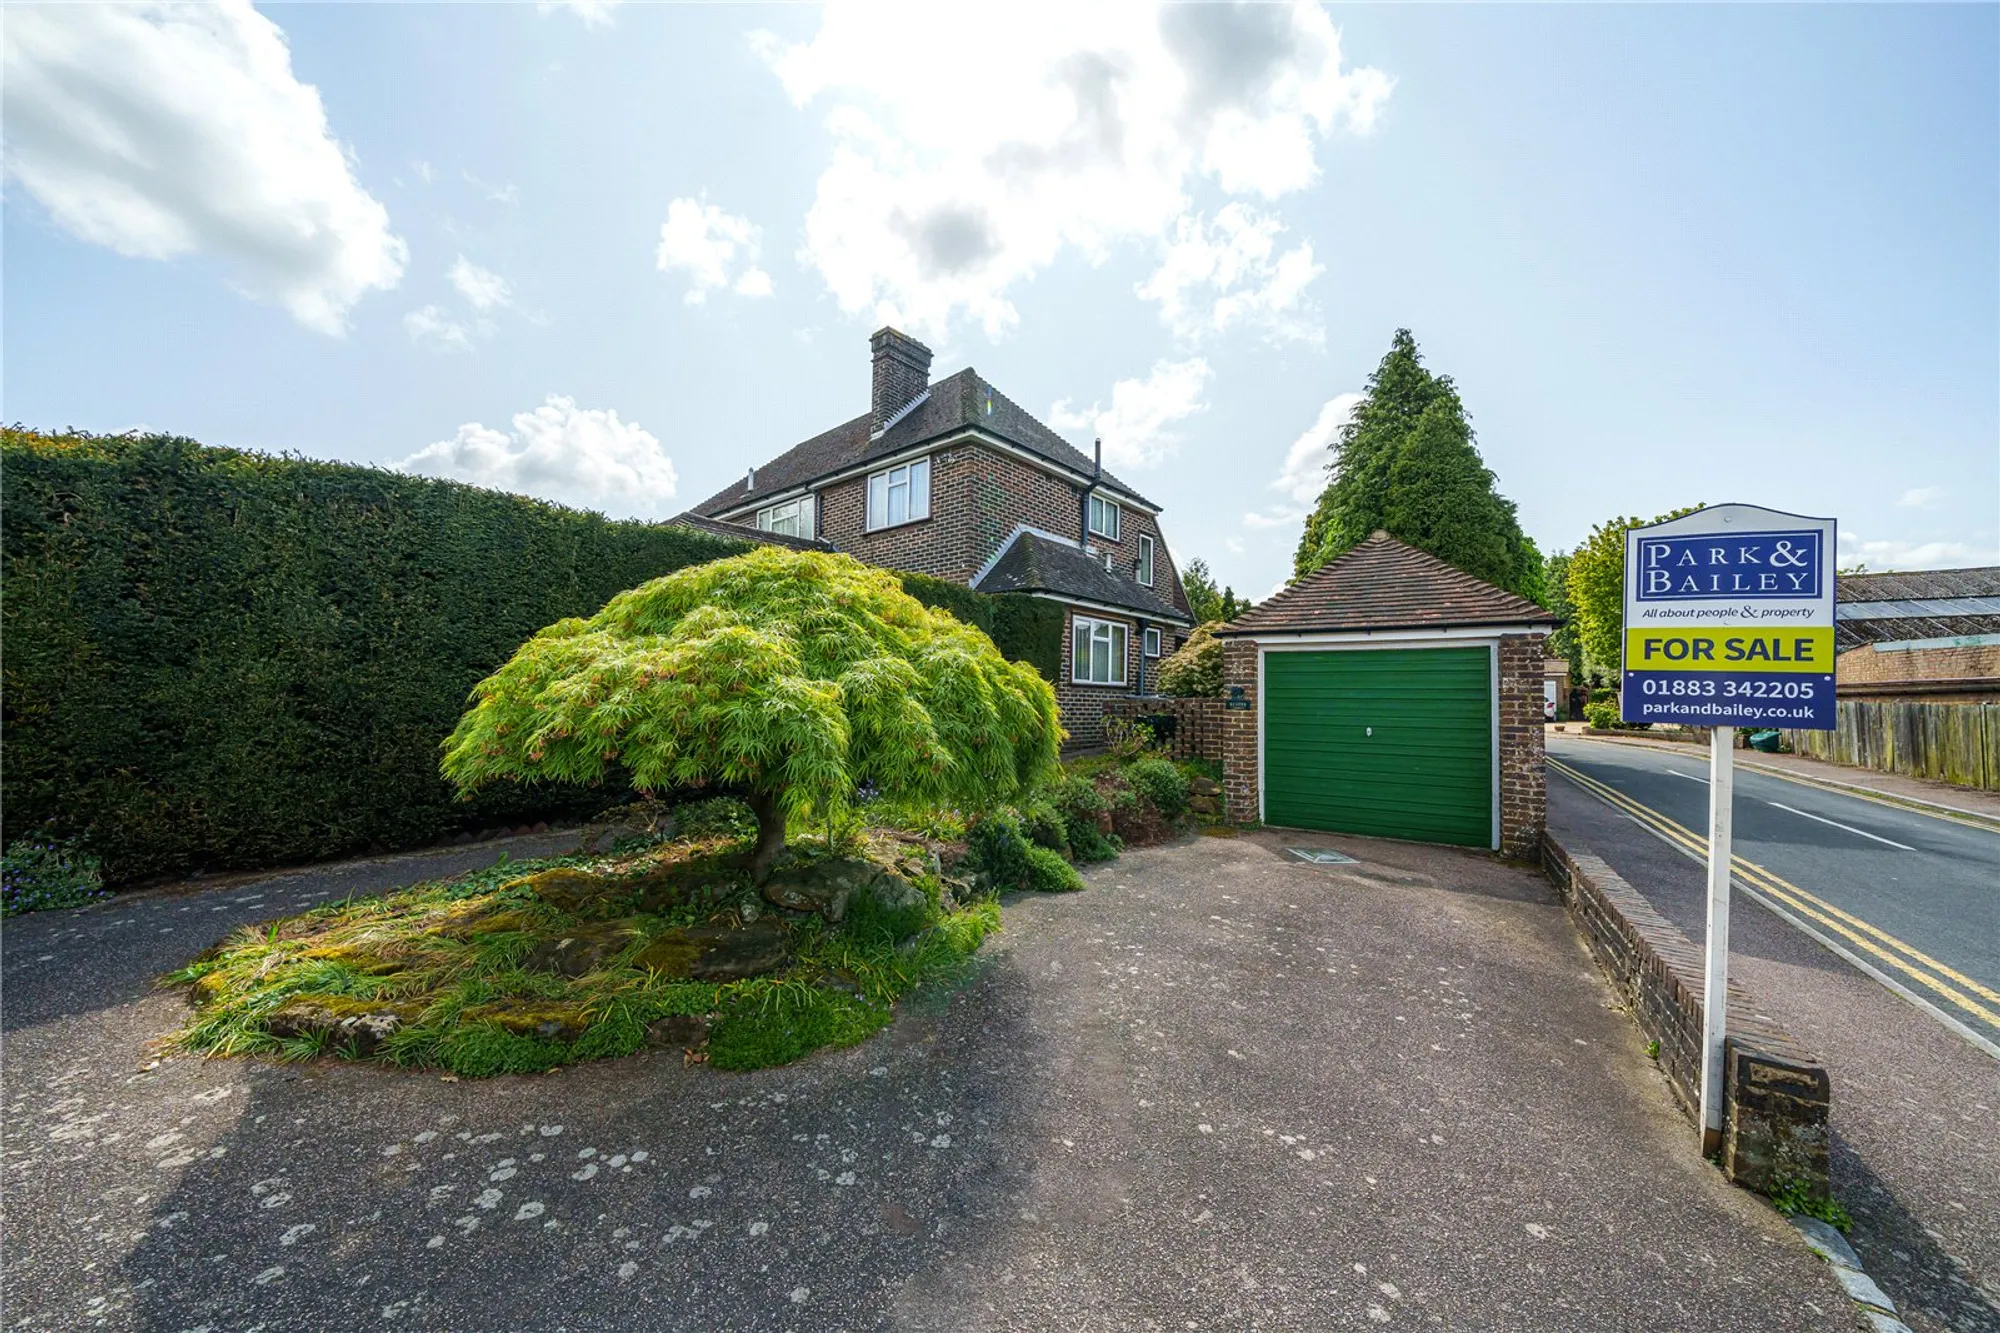 4 bed detached house for sale in Essendene Road, Caterham  - Property Image 1